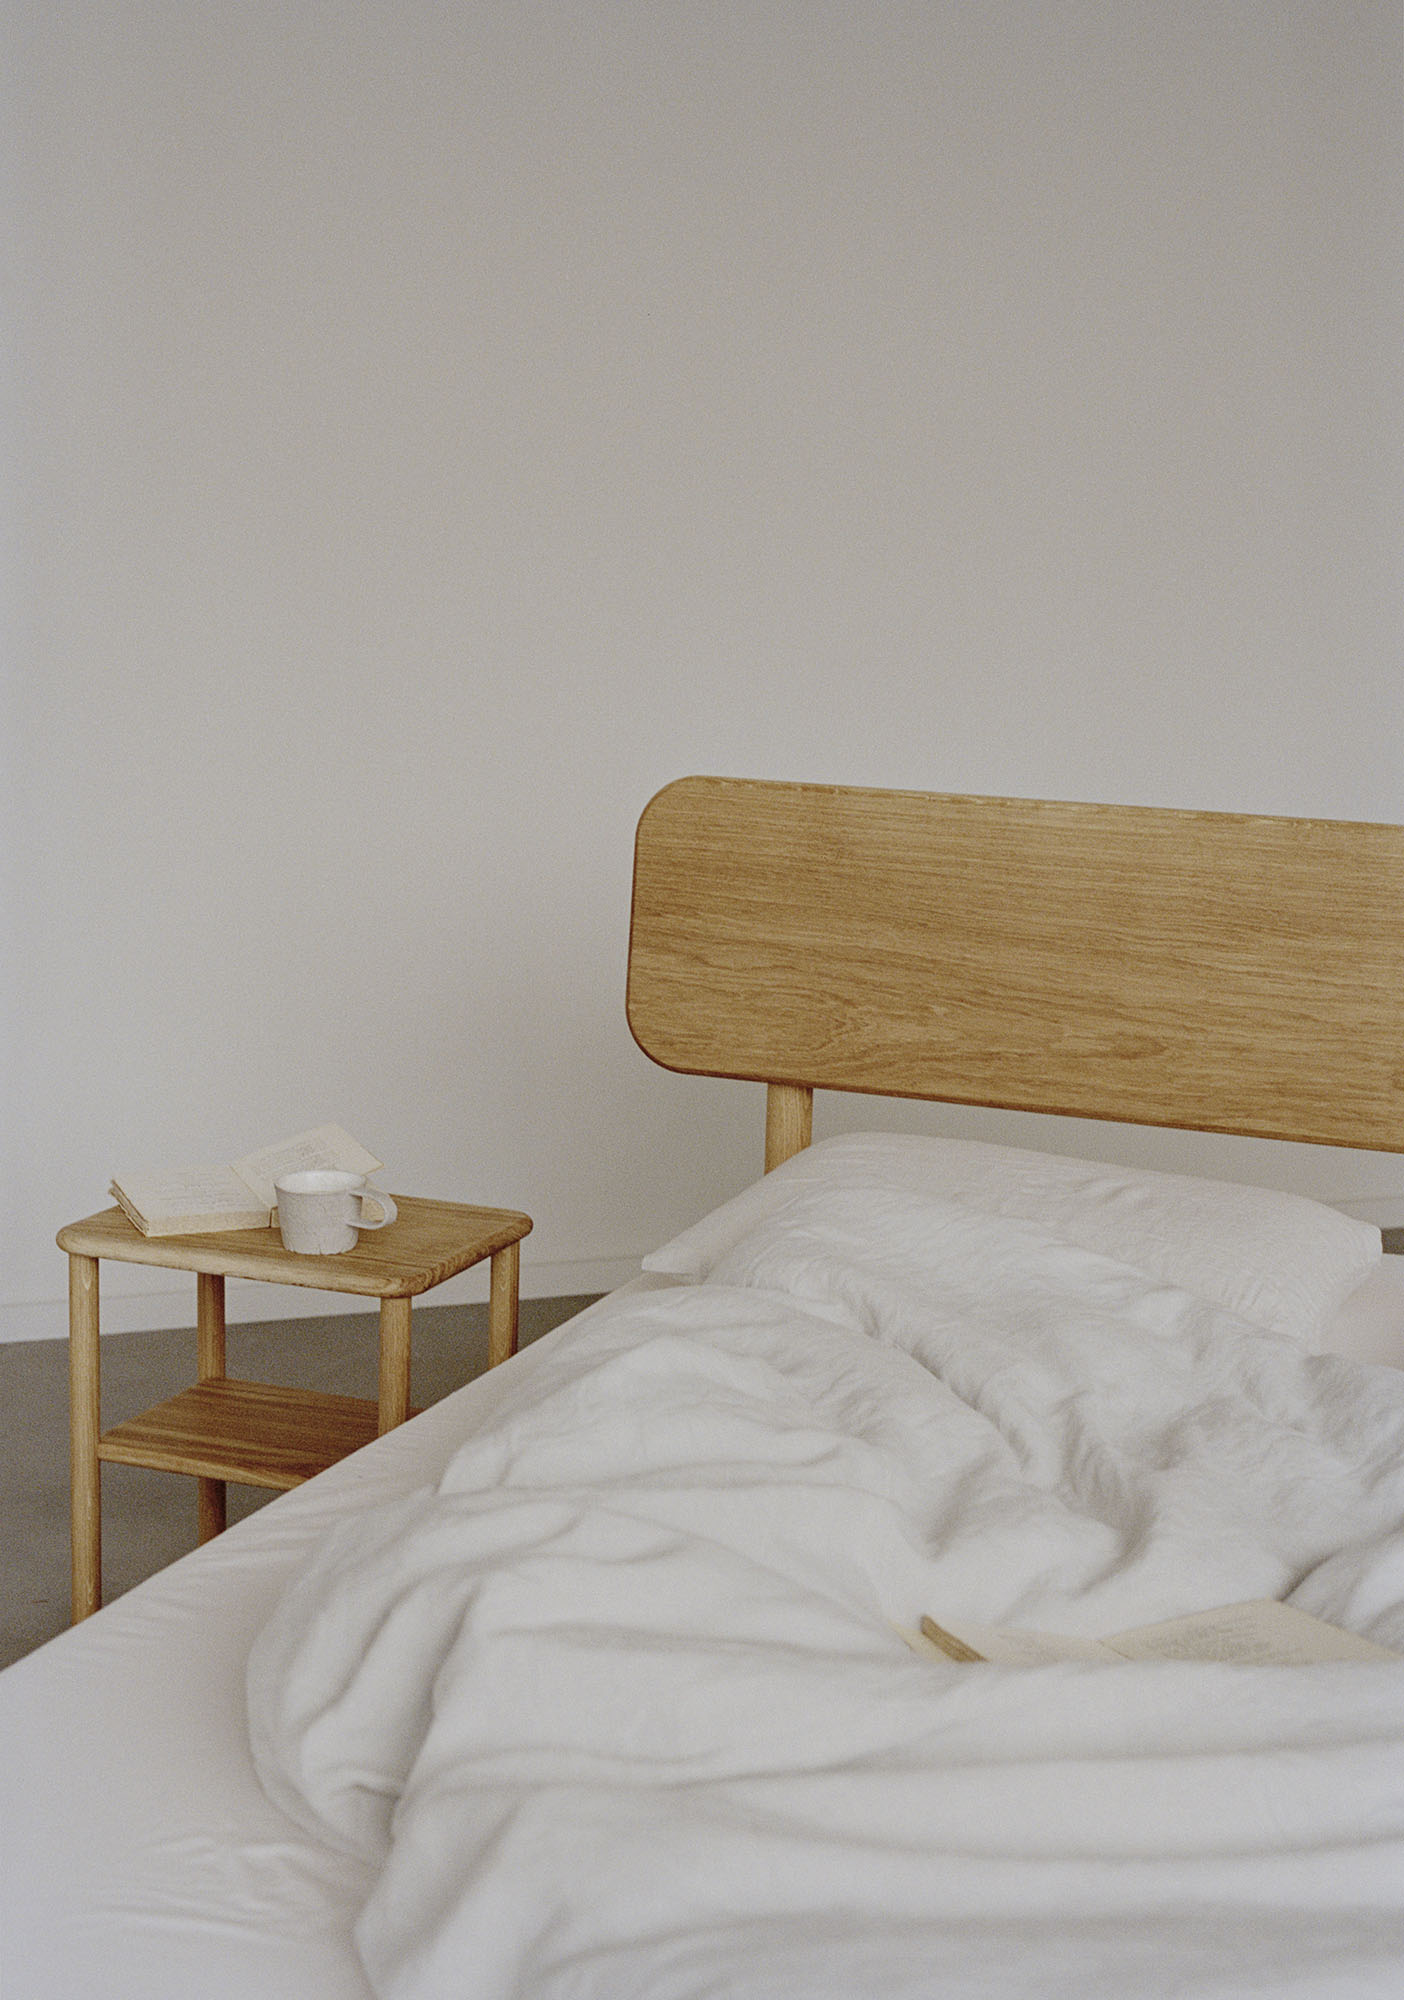 RYE Alken bed frame in oiled solid oak - Bed frame and Alling nightstand in environment